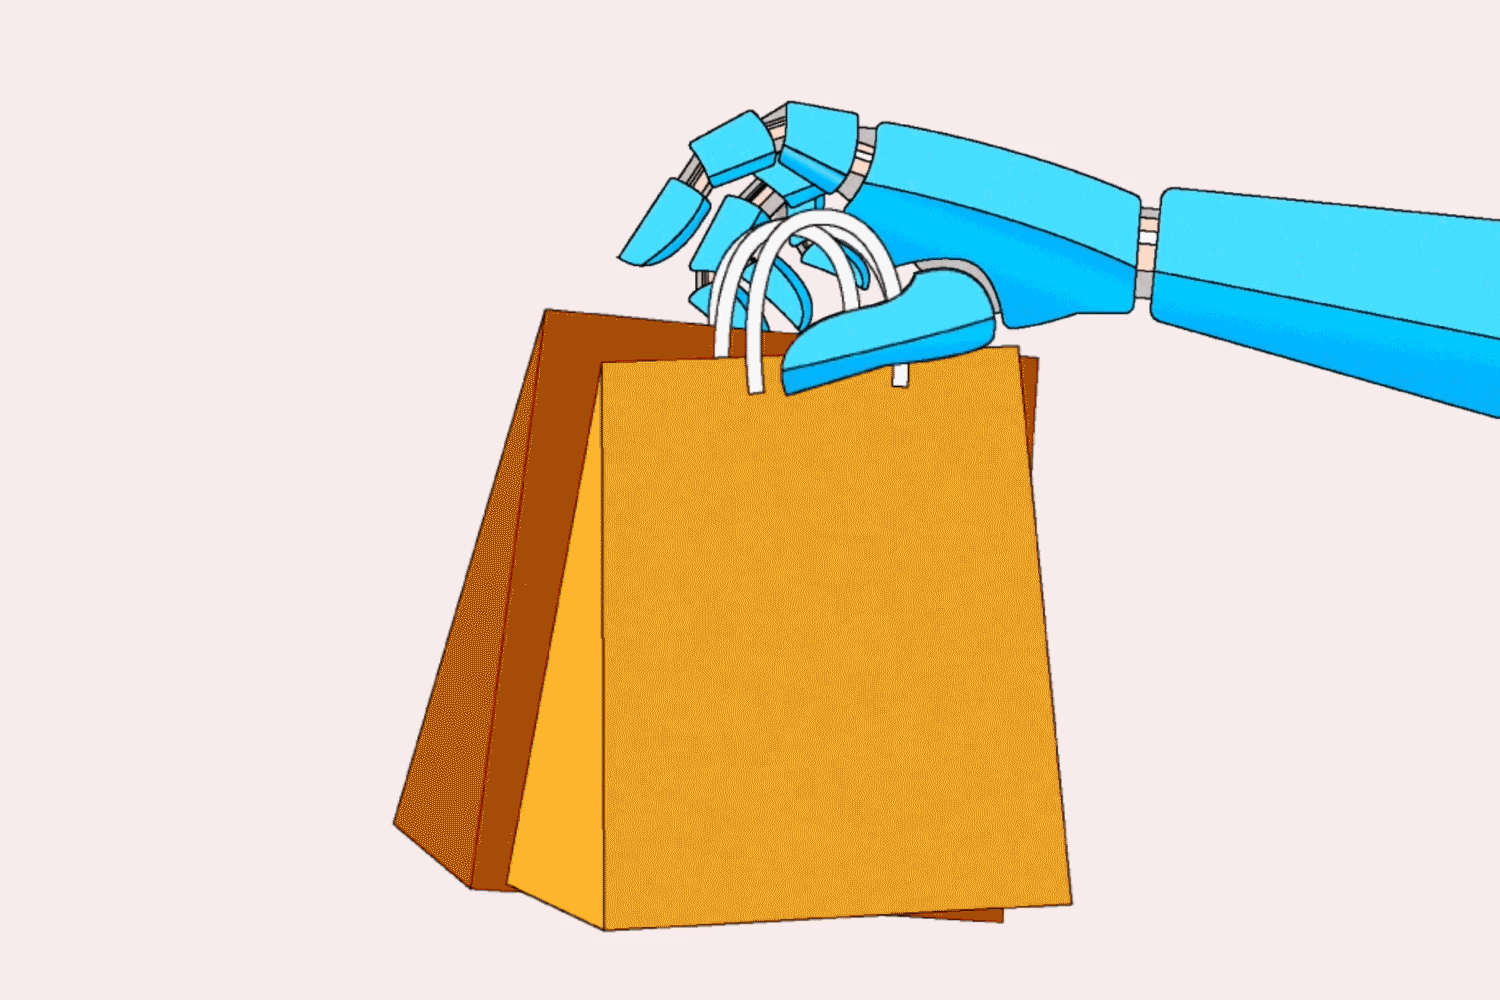 Gif of a robot arm holding out retail shopping bags